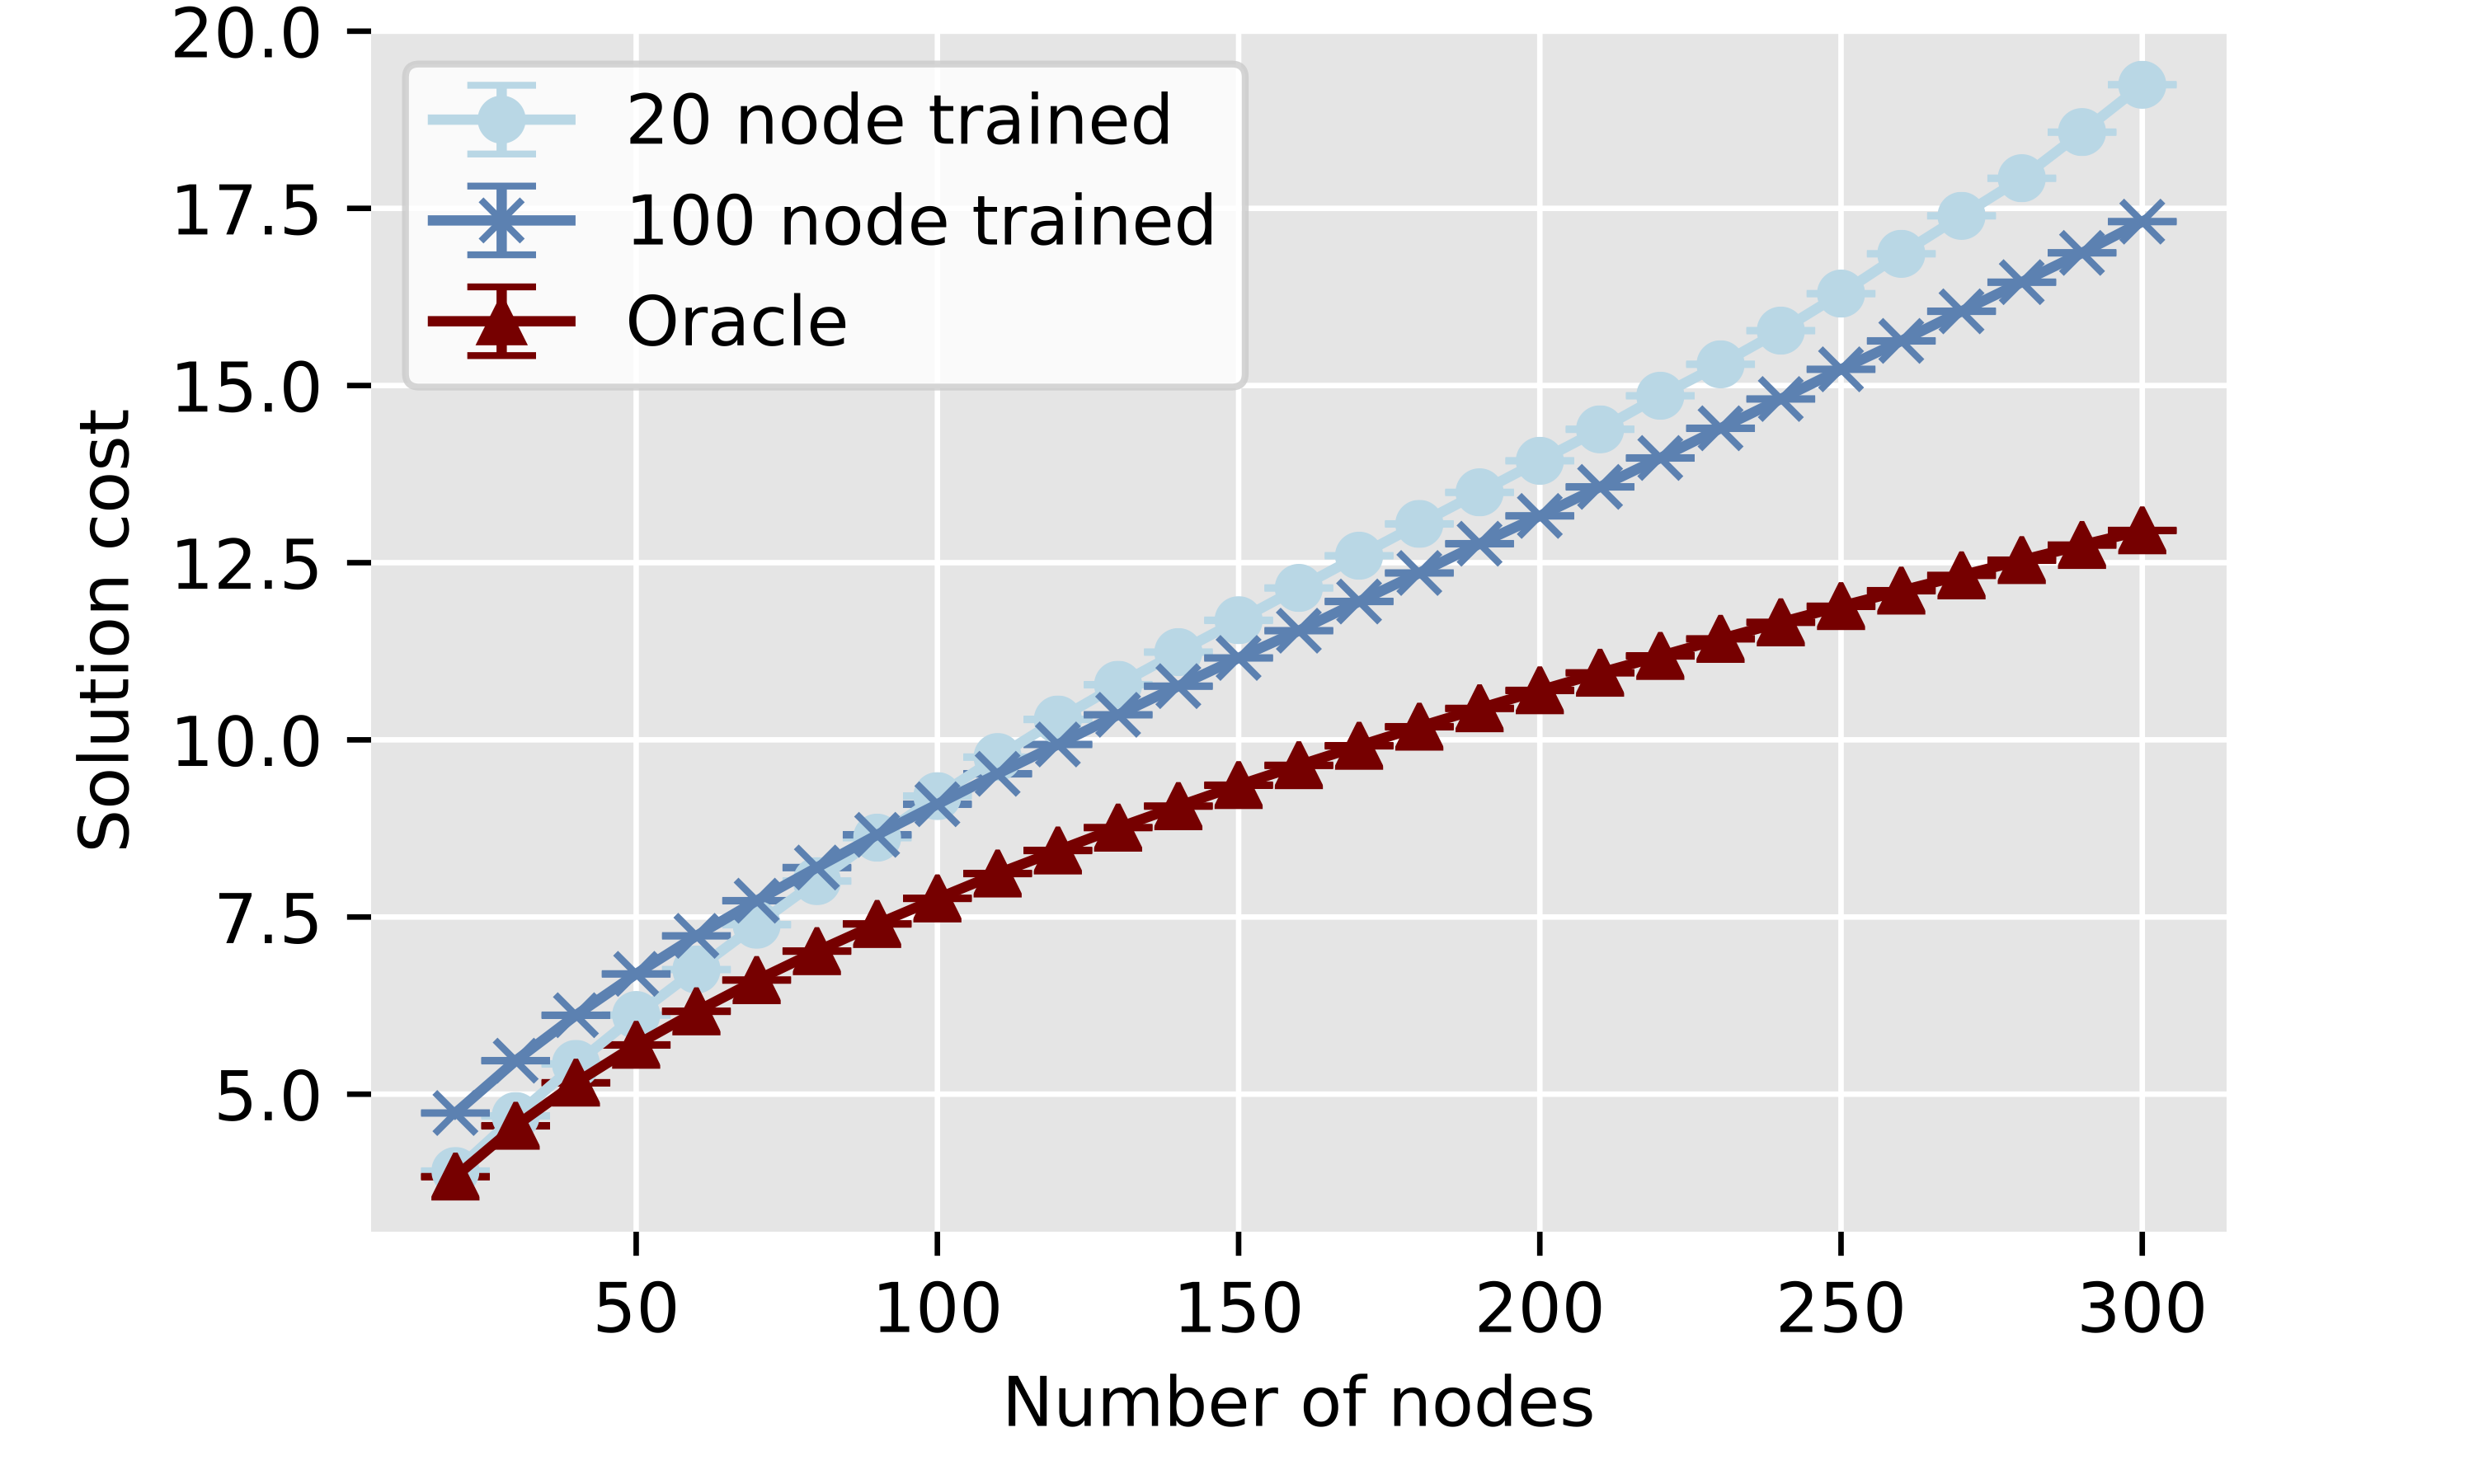 The average traversal time (hrs) relative to the number of nodes in the graph
for policies trained exclusively on 25 node graphs and 100 node graphs
